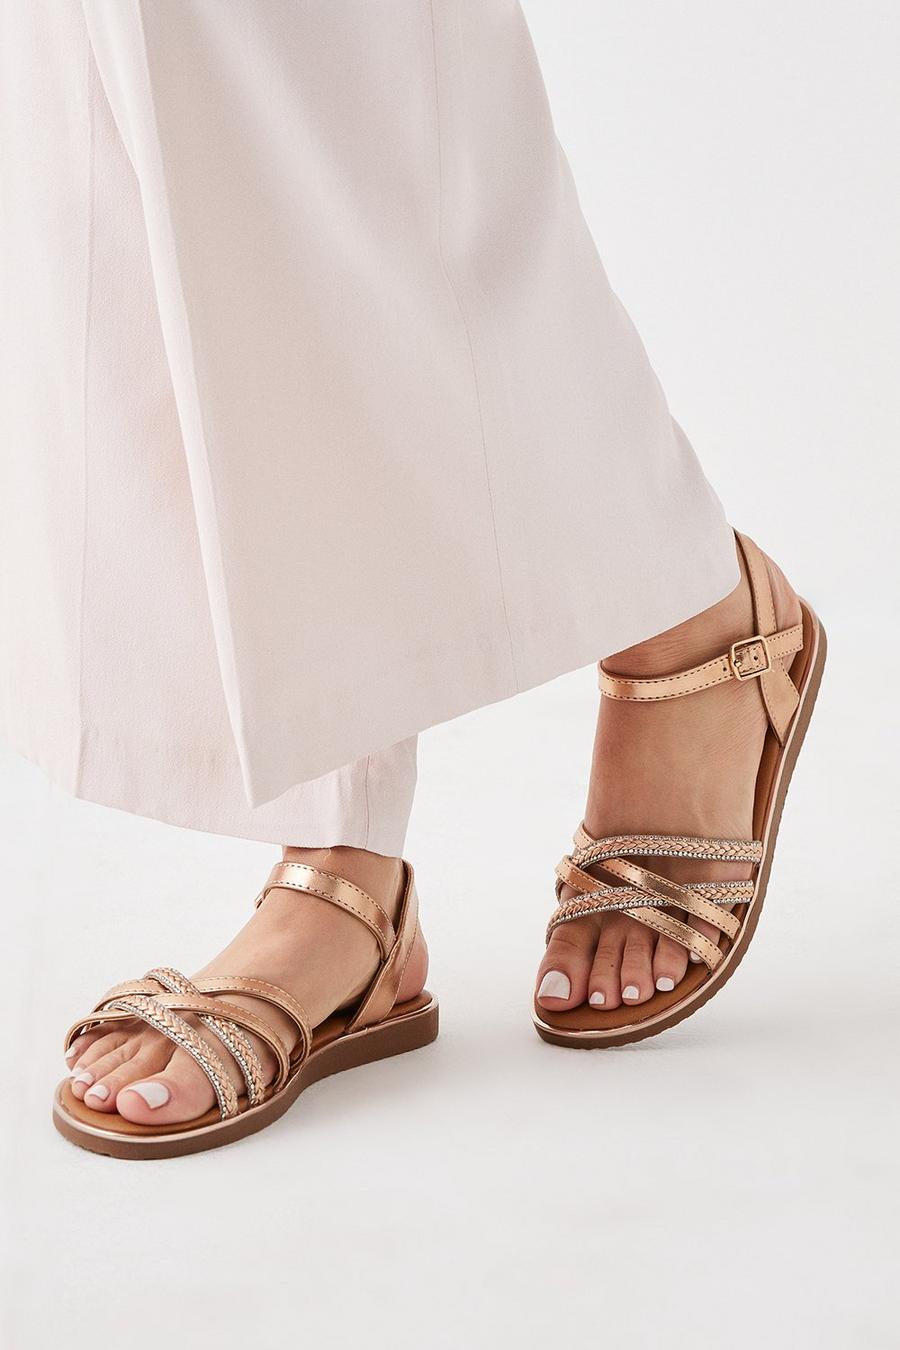 Good For The Sole: Martha Flexi Sole Flat Sandals